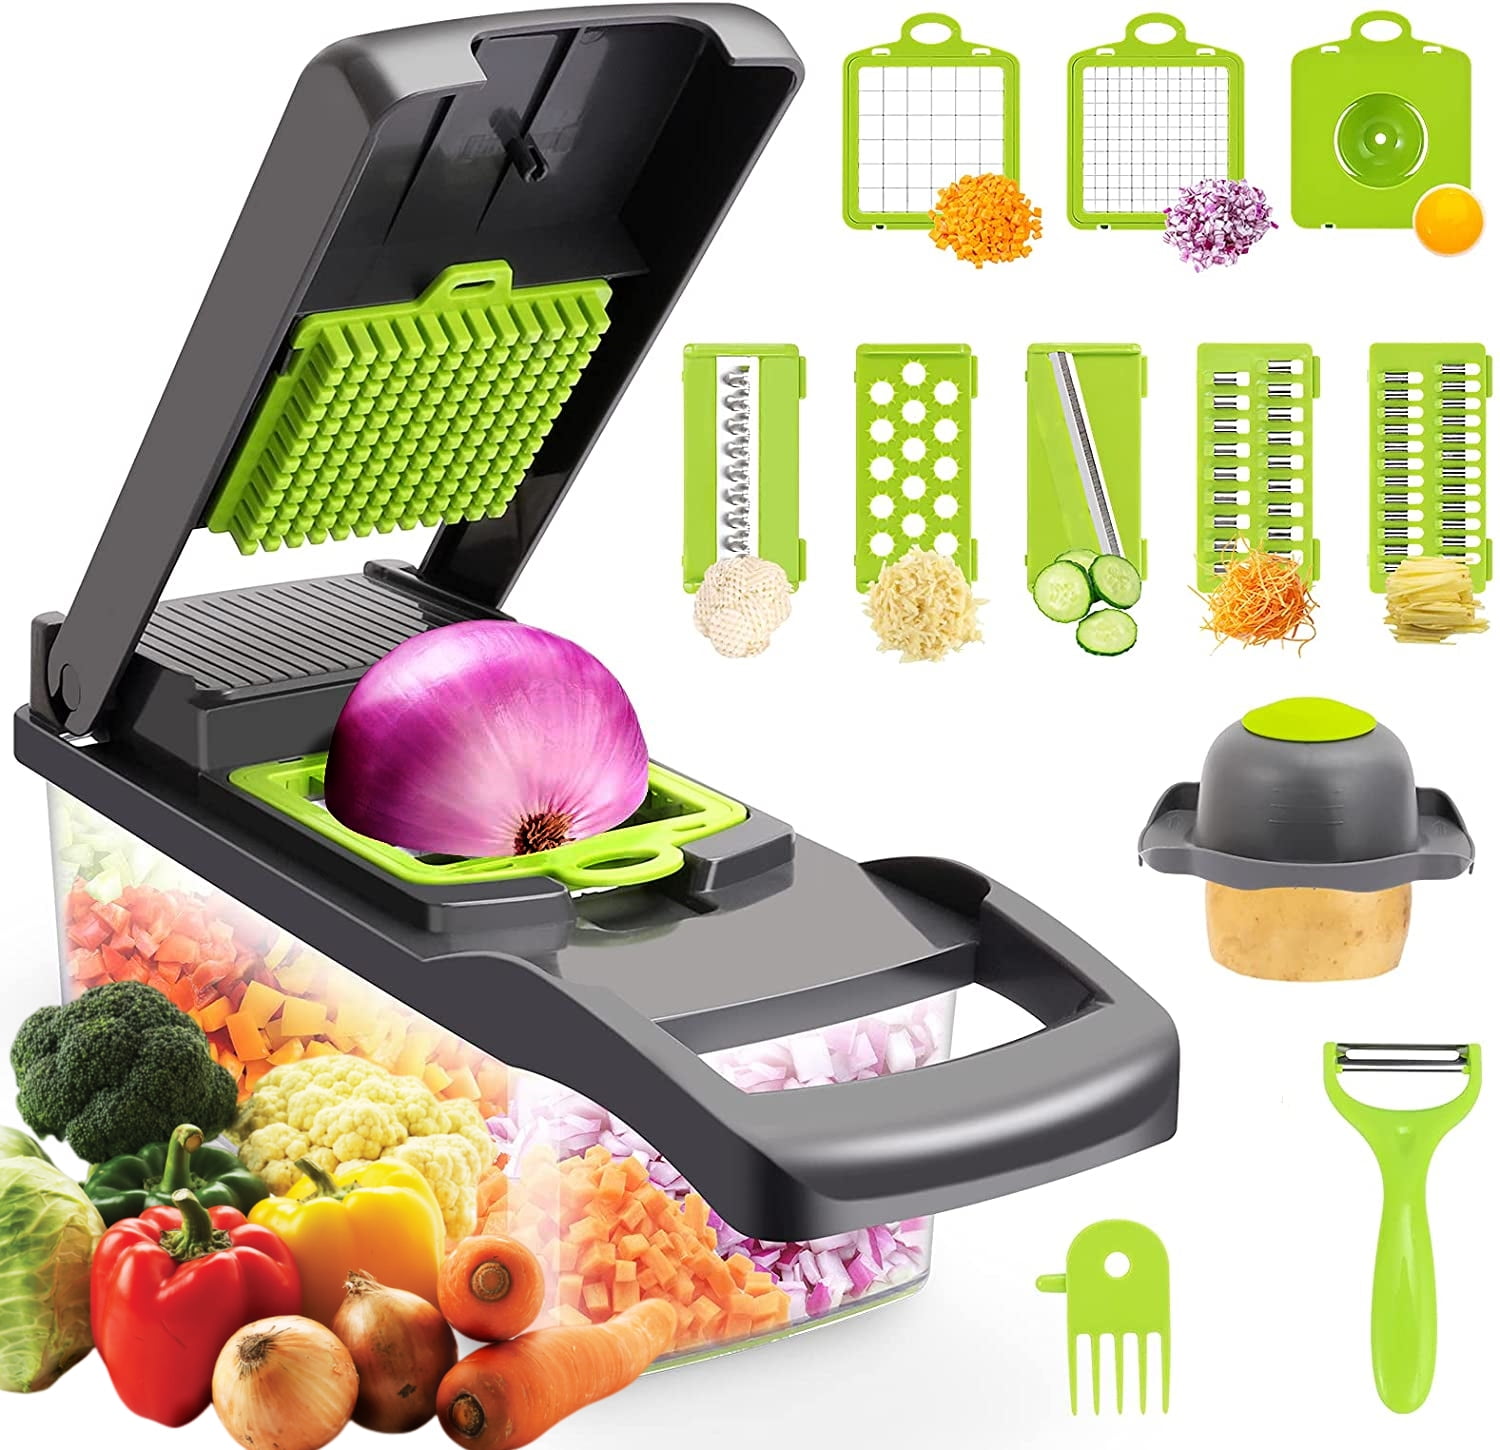 Wholesale SIHAO stainless steel multifunctional fruit chopper slicer  vegetable cutter w/ 4 Blades Fruits Dicer From m.